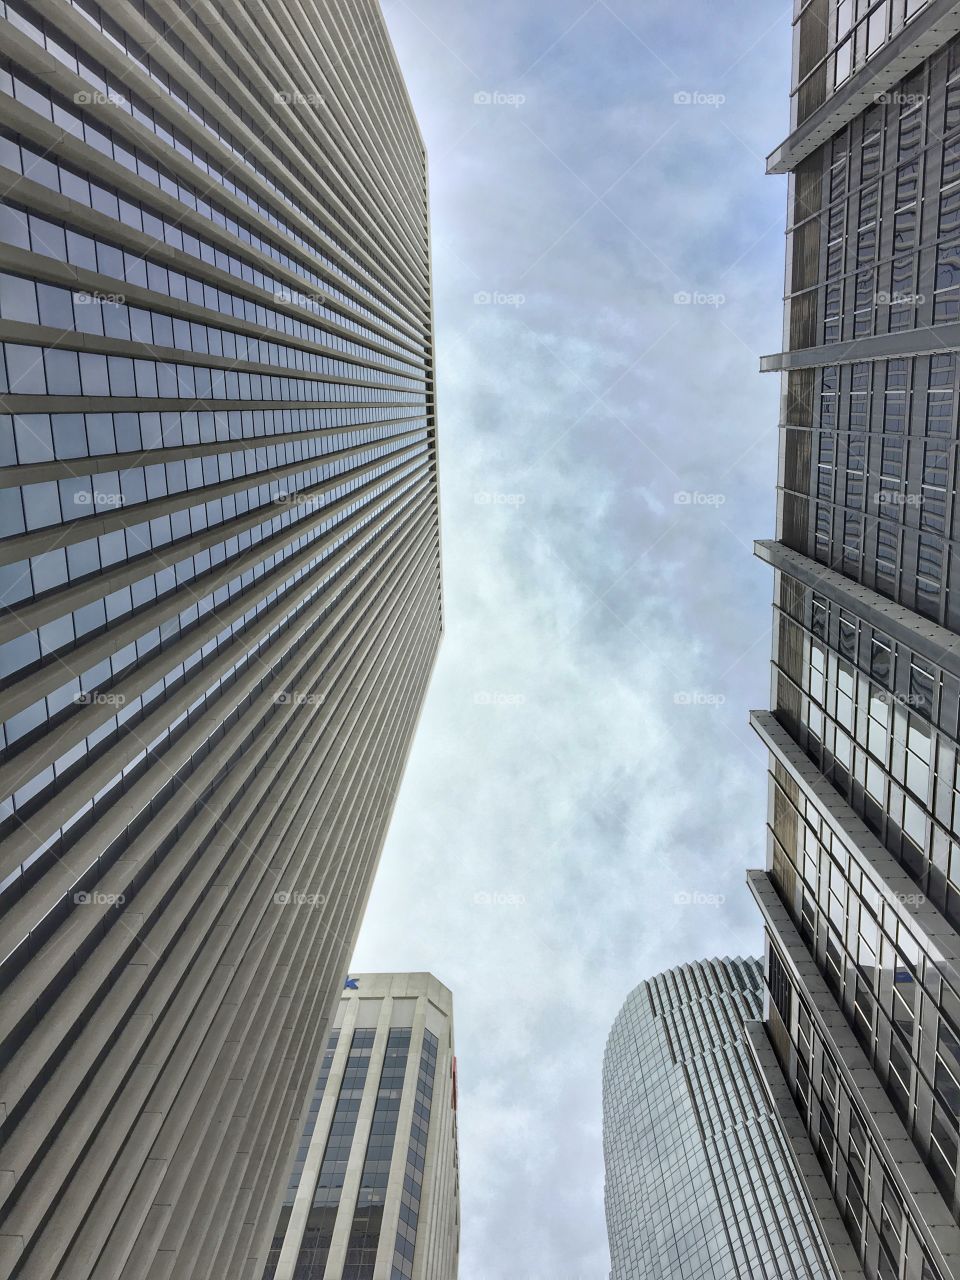 High buildings of San Francisco. View from underneath. 